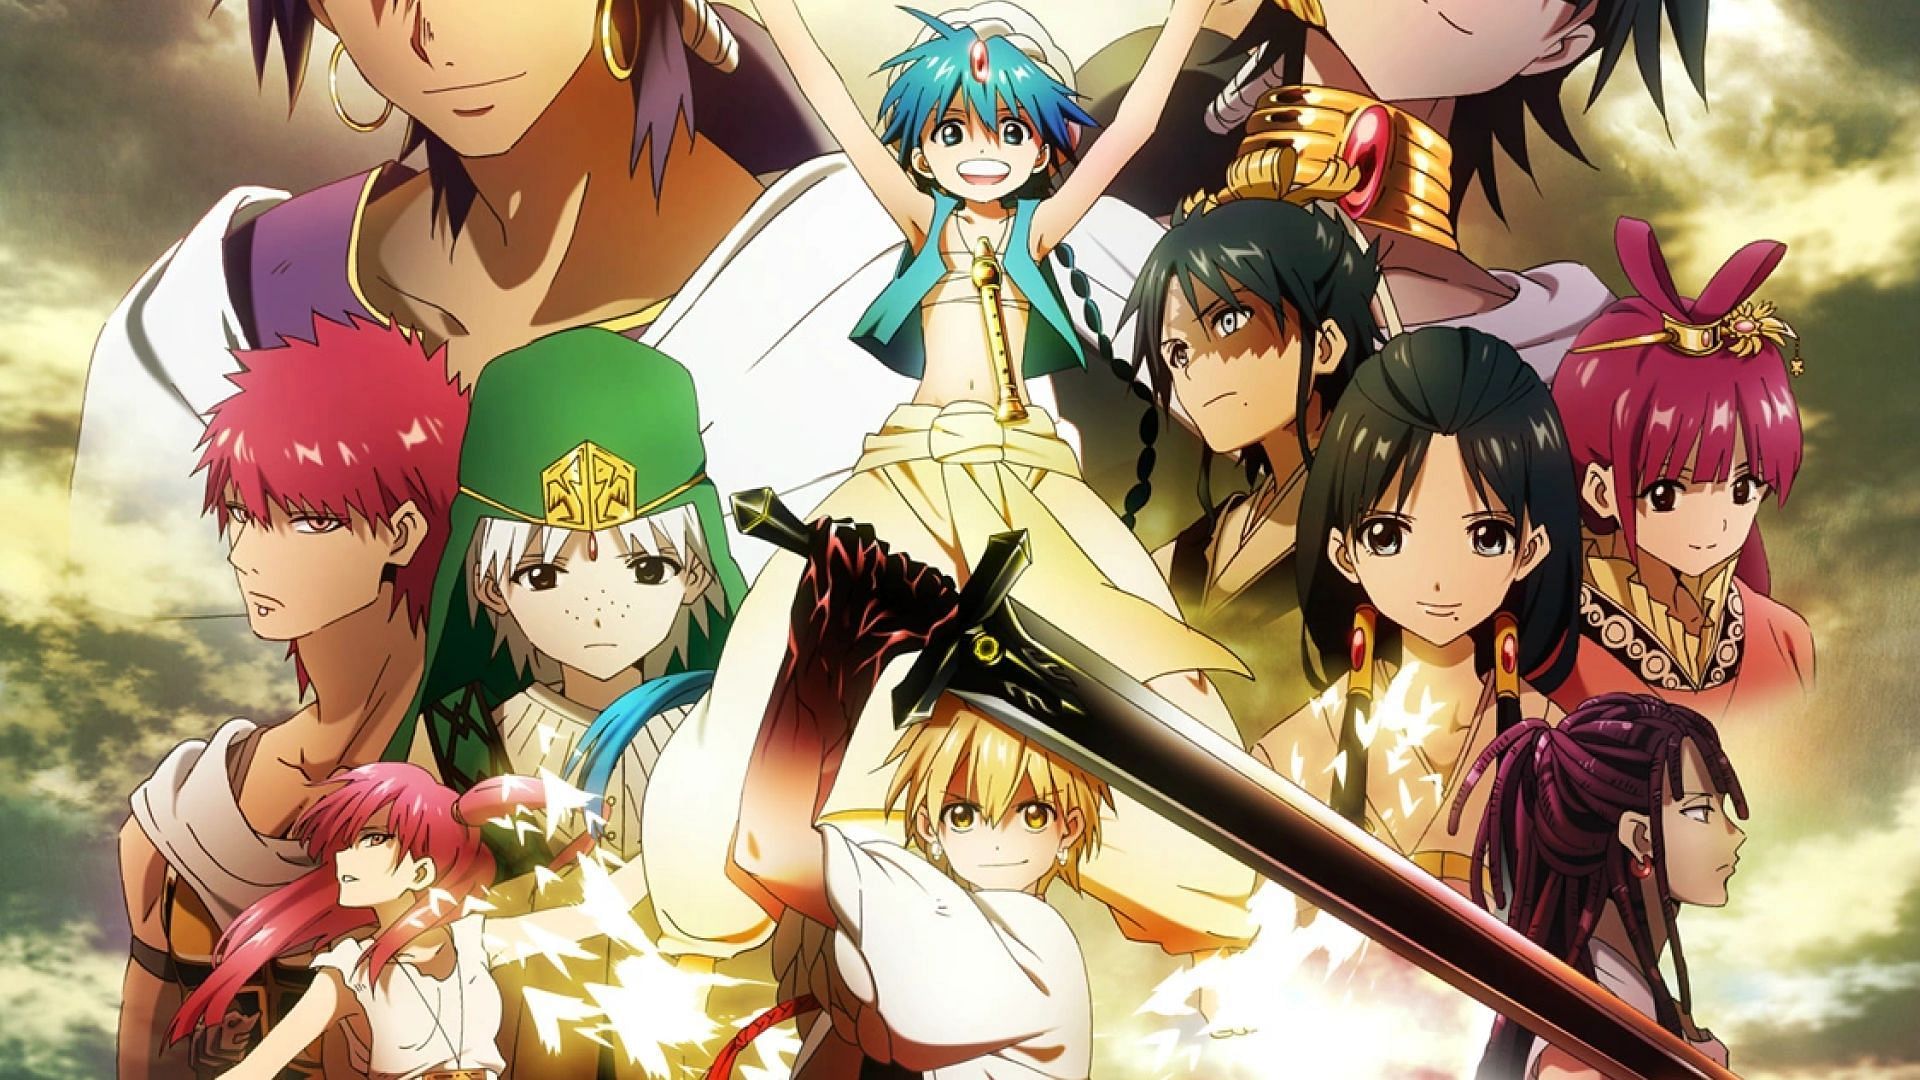 Qoo News] Shonen Manga Magi: The Labyrinth of Magic officially ended after  8 years of serialisation